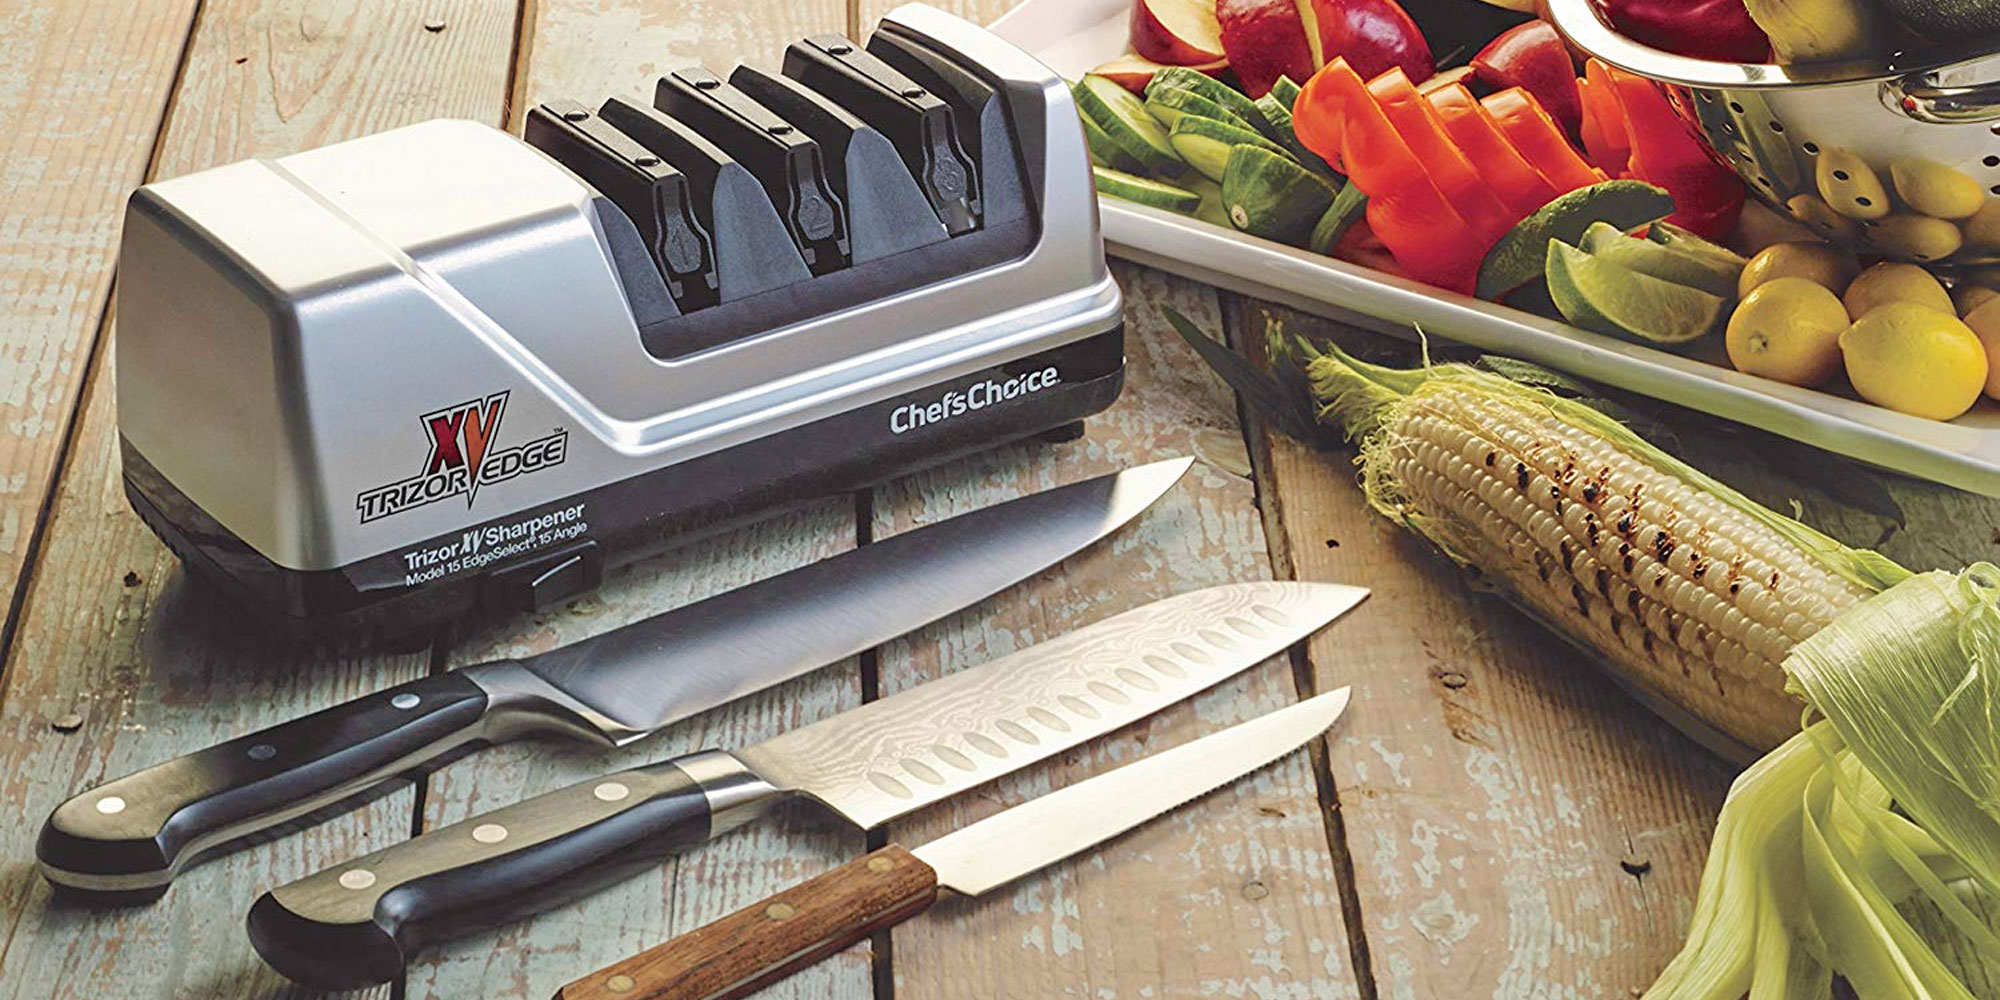 https://9to5toys.com/wp-content/uploads/sites/5/2019/01/ChefsChoice-Electric-Knife-Sharpener.jpg